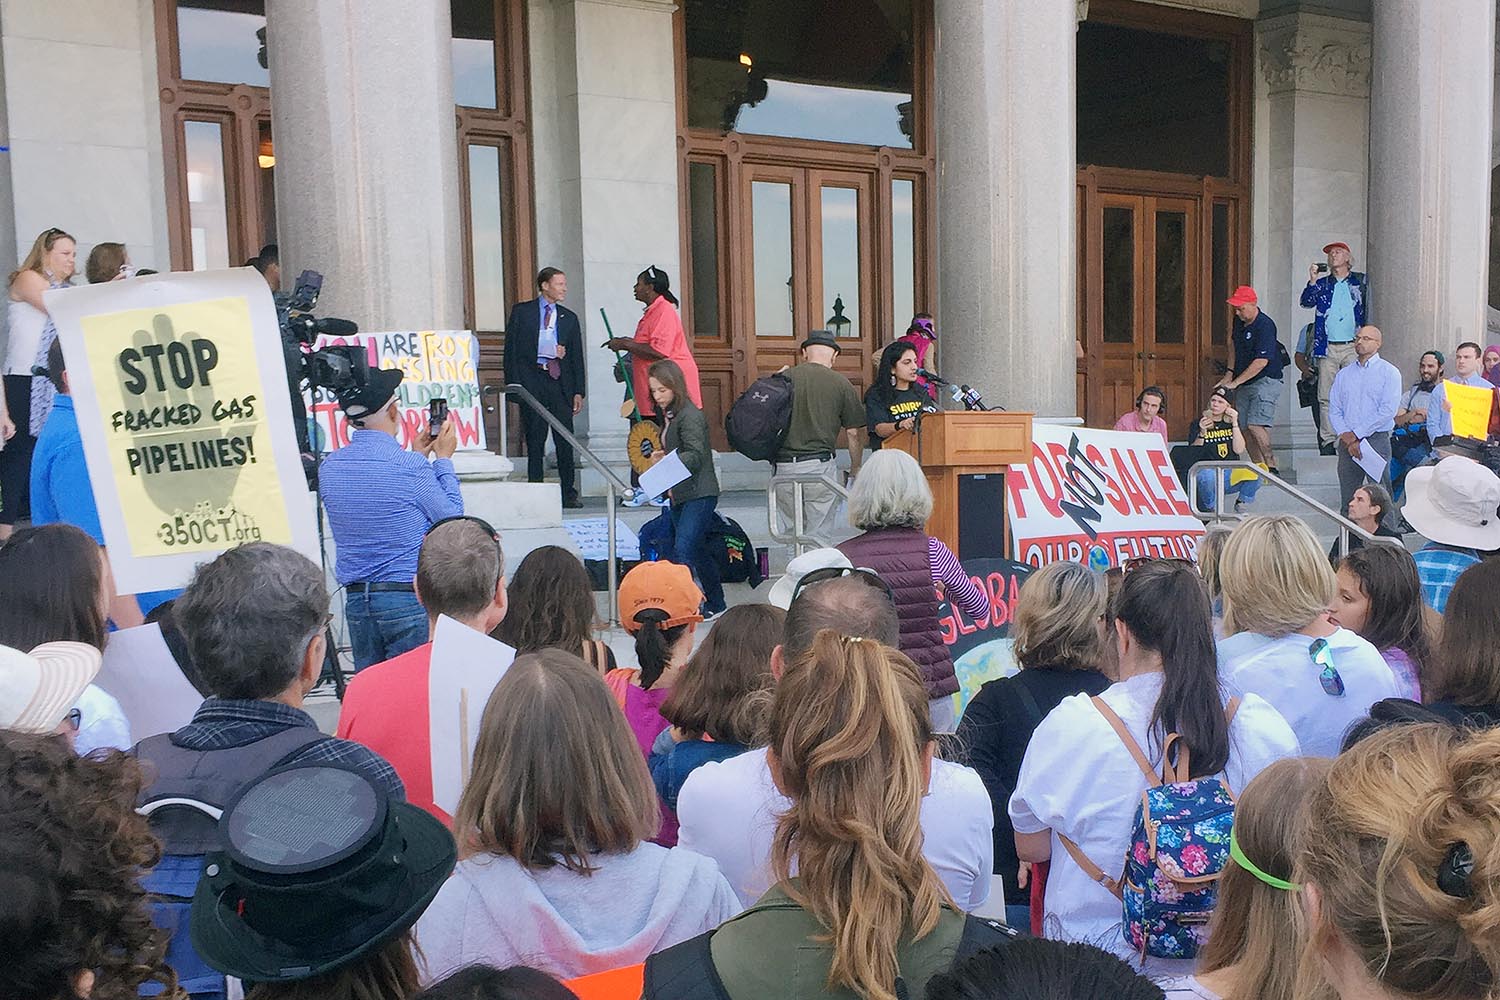 An additional 40 Wesleyan students rallied at the climate strike in Hartford. Sanya Bery '20 spoke there too  :)